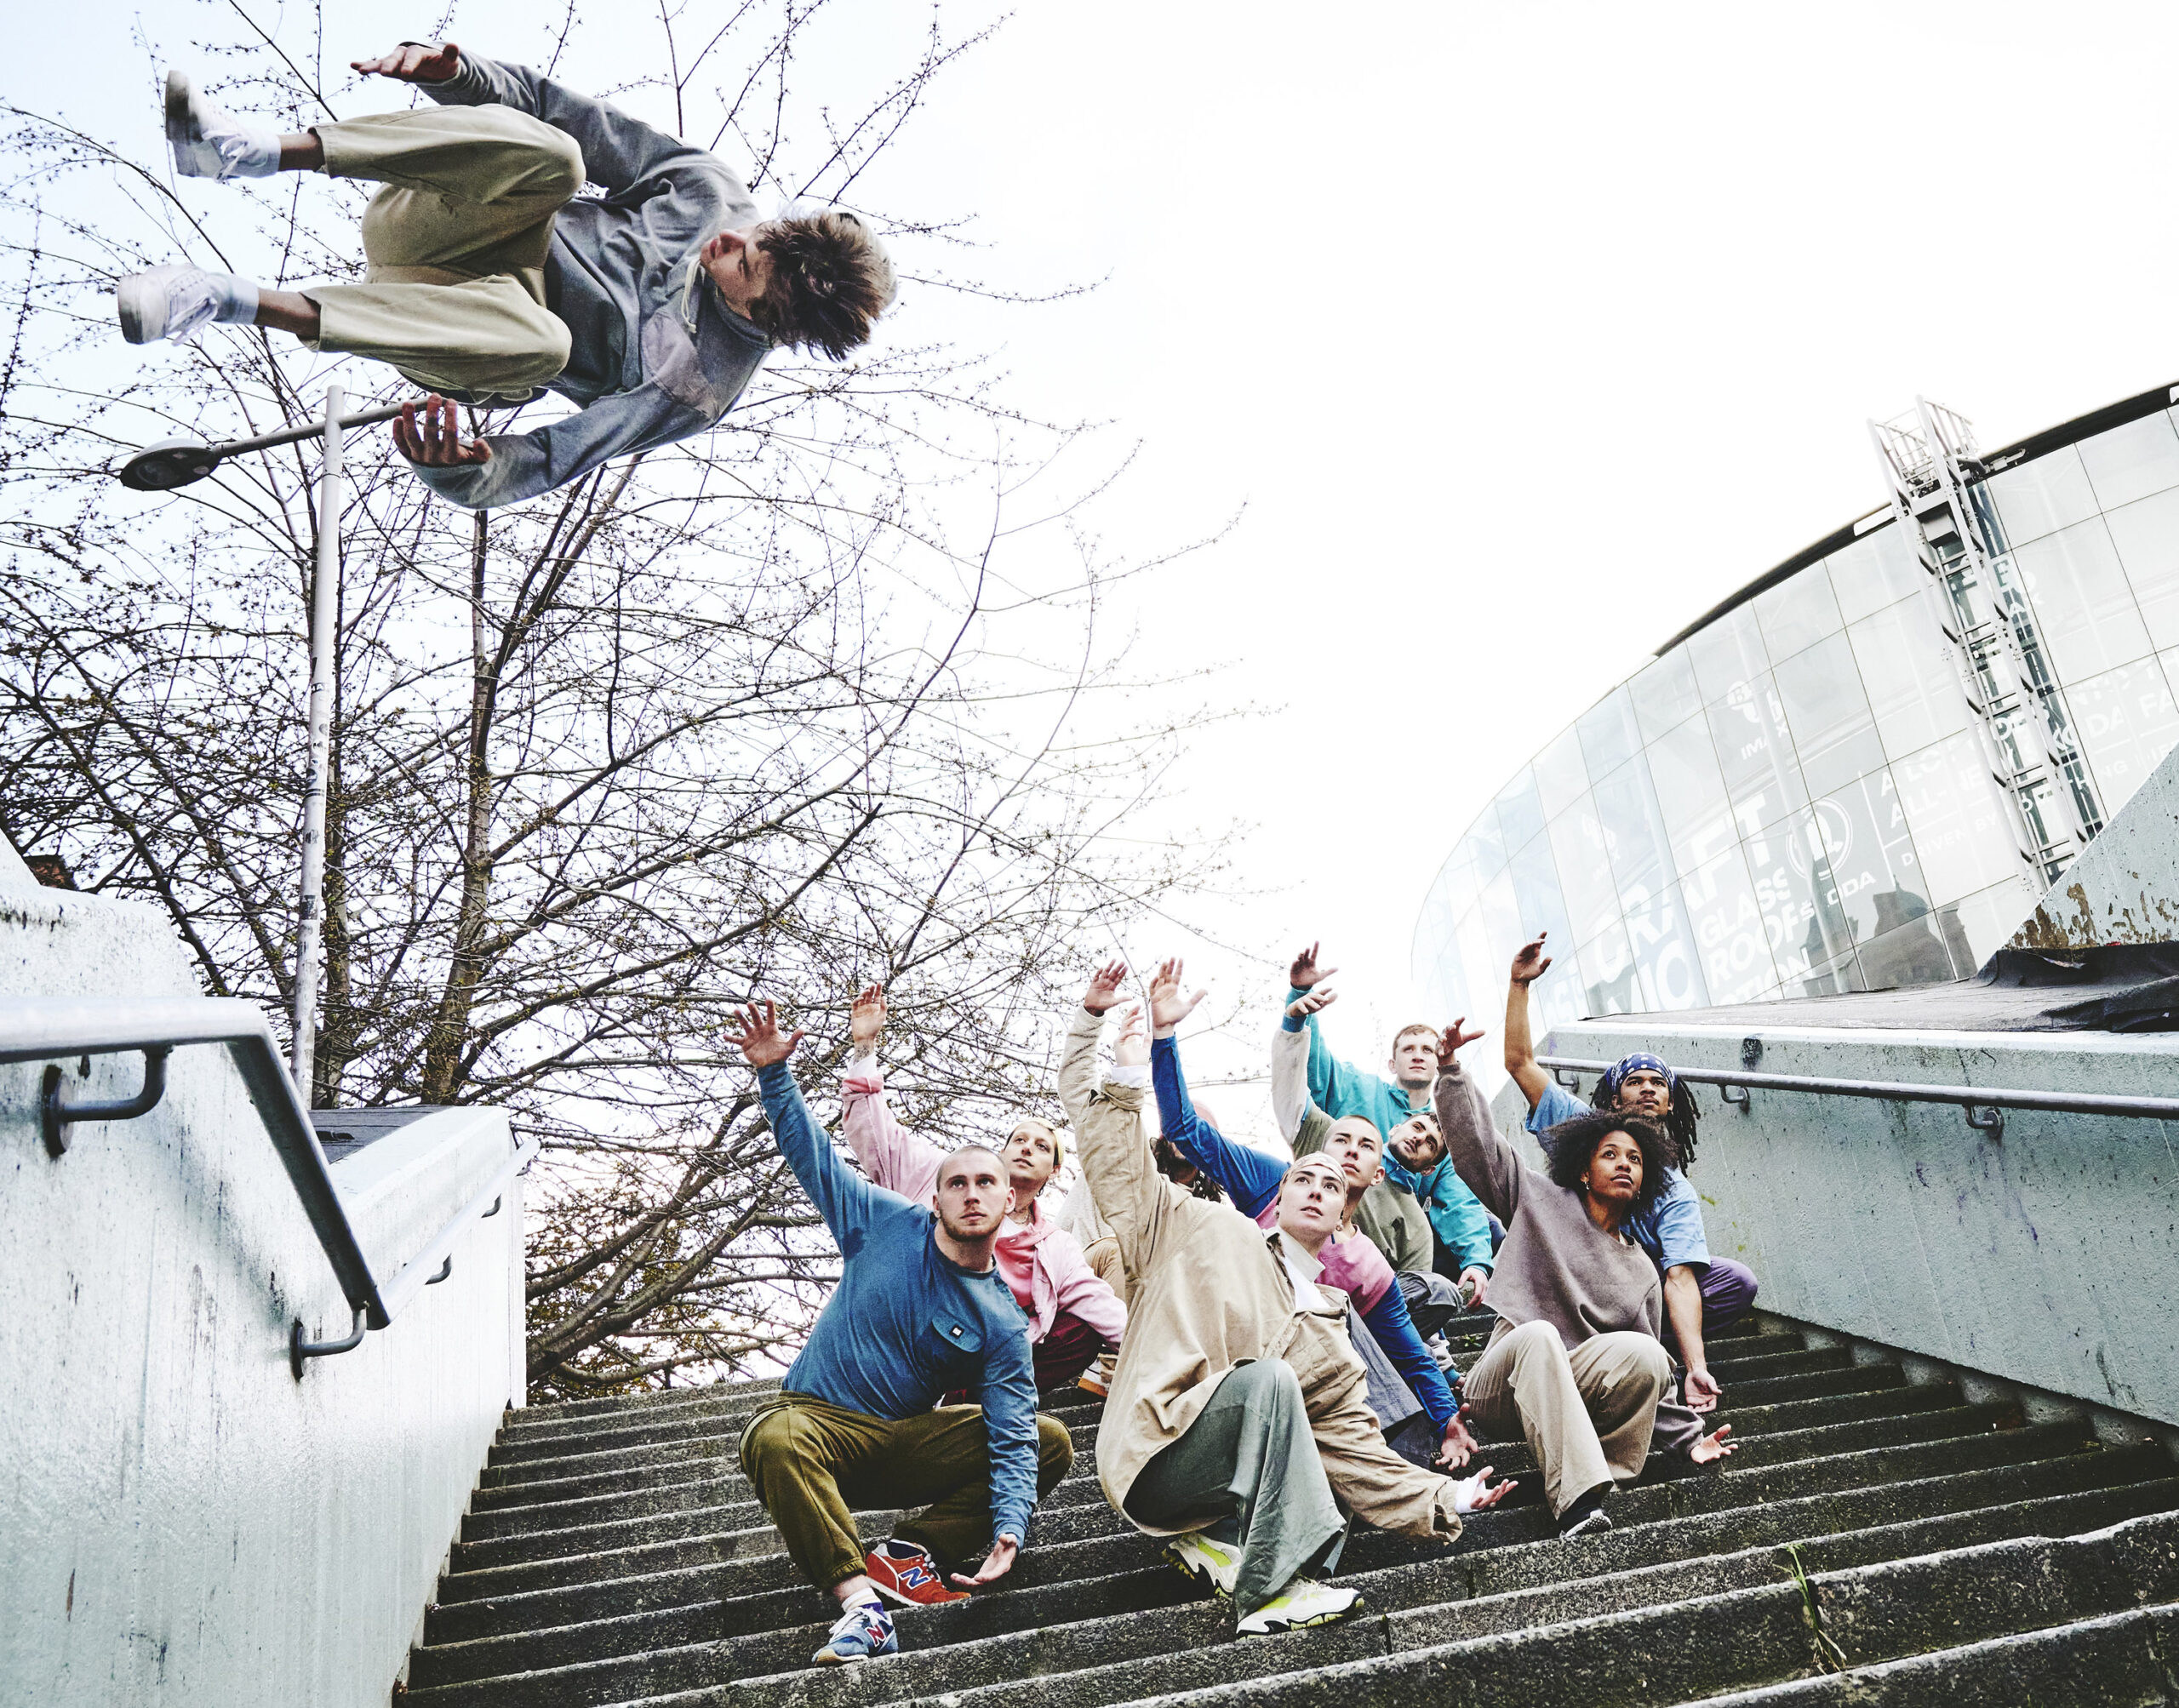 9 young people crouch on concrete steps under a grey sky. Their right arms are lifted up. A 10th person hovers sideways in mid-air with legs tucked in, halfway through a jump